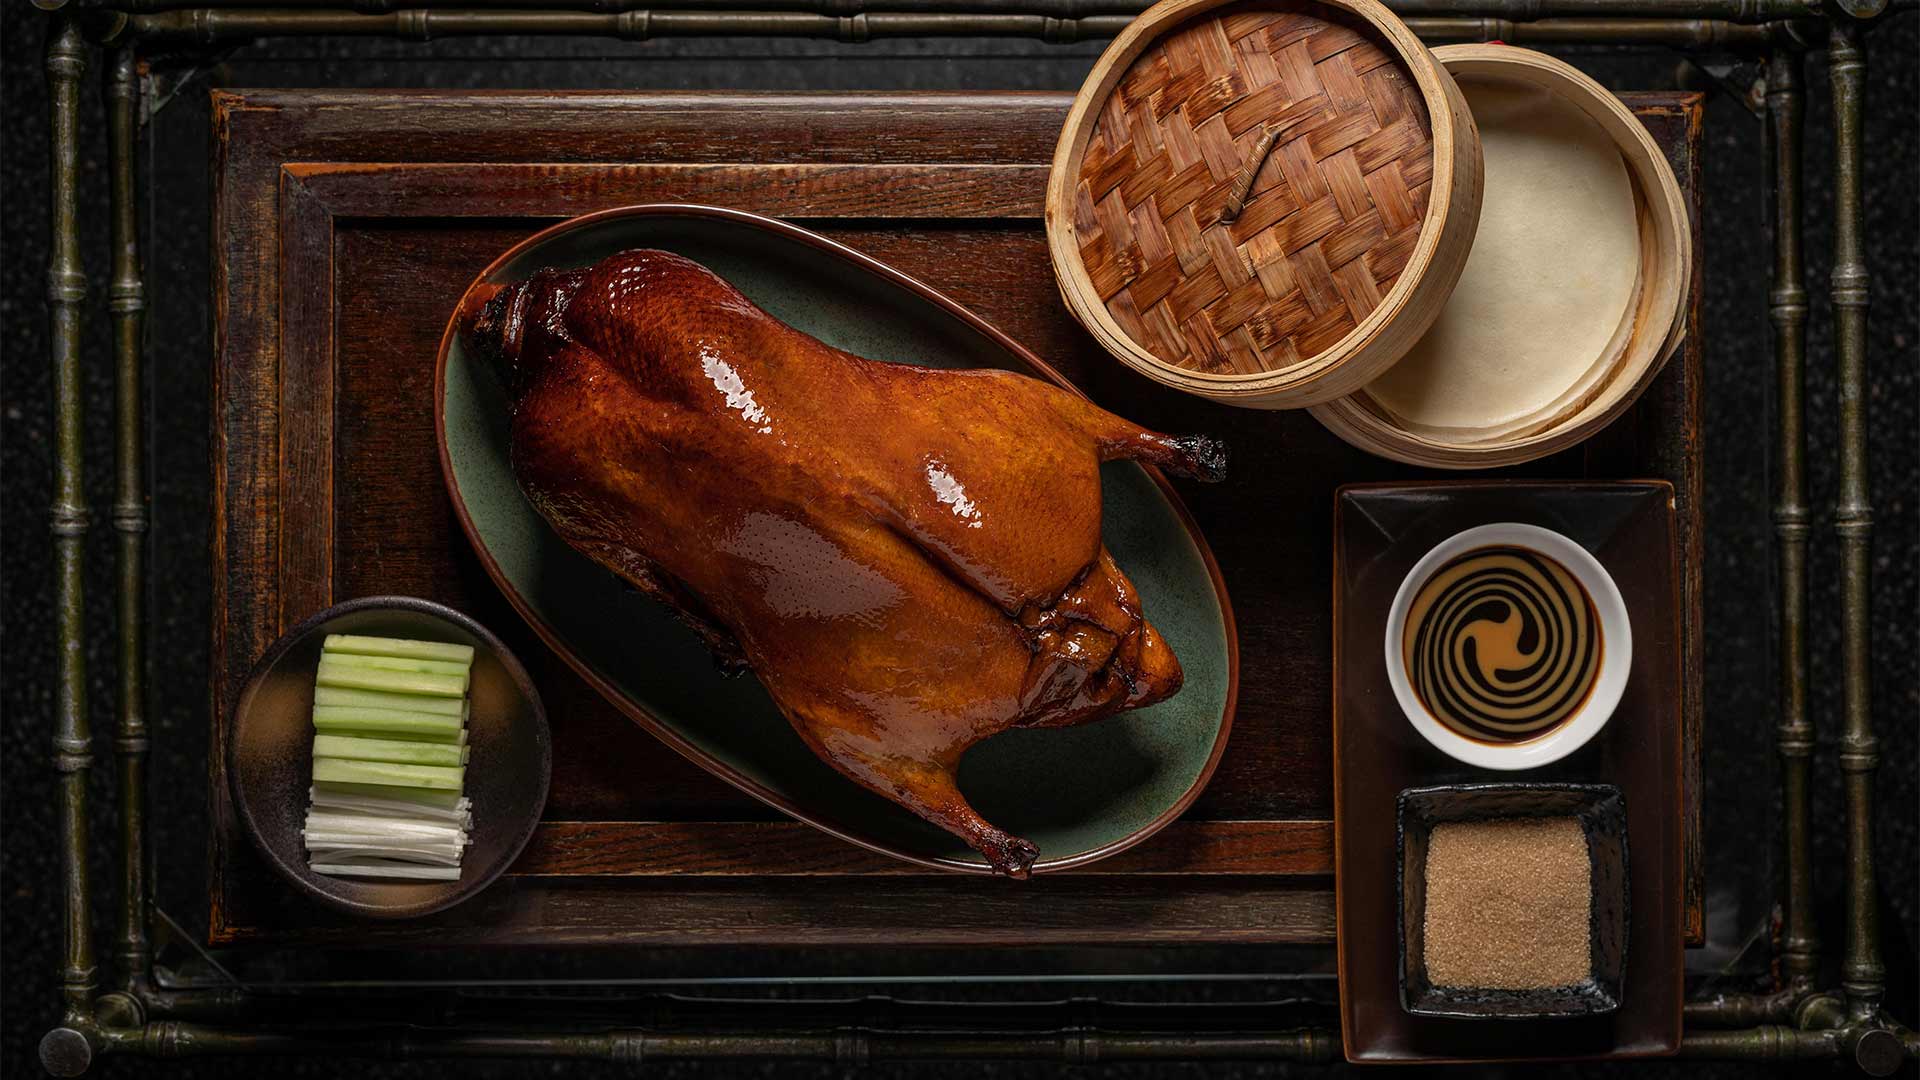 Apple wood roasted peking duck served at Mott 32 Singapore, for a private event